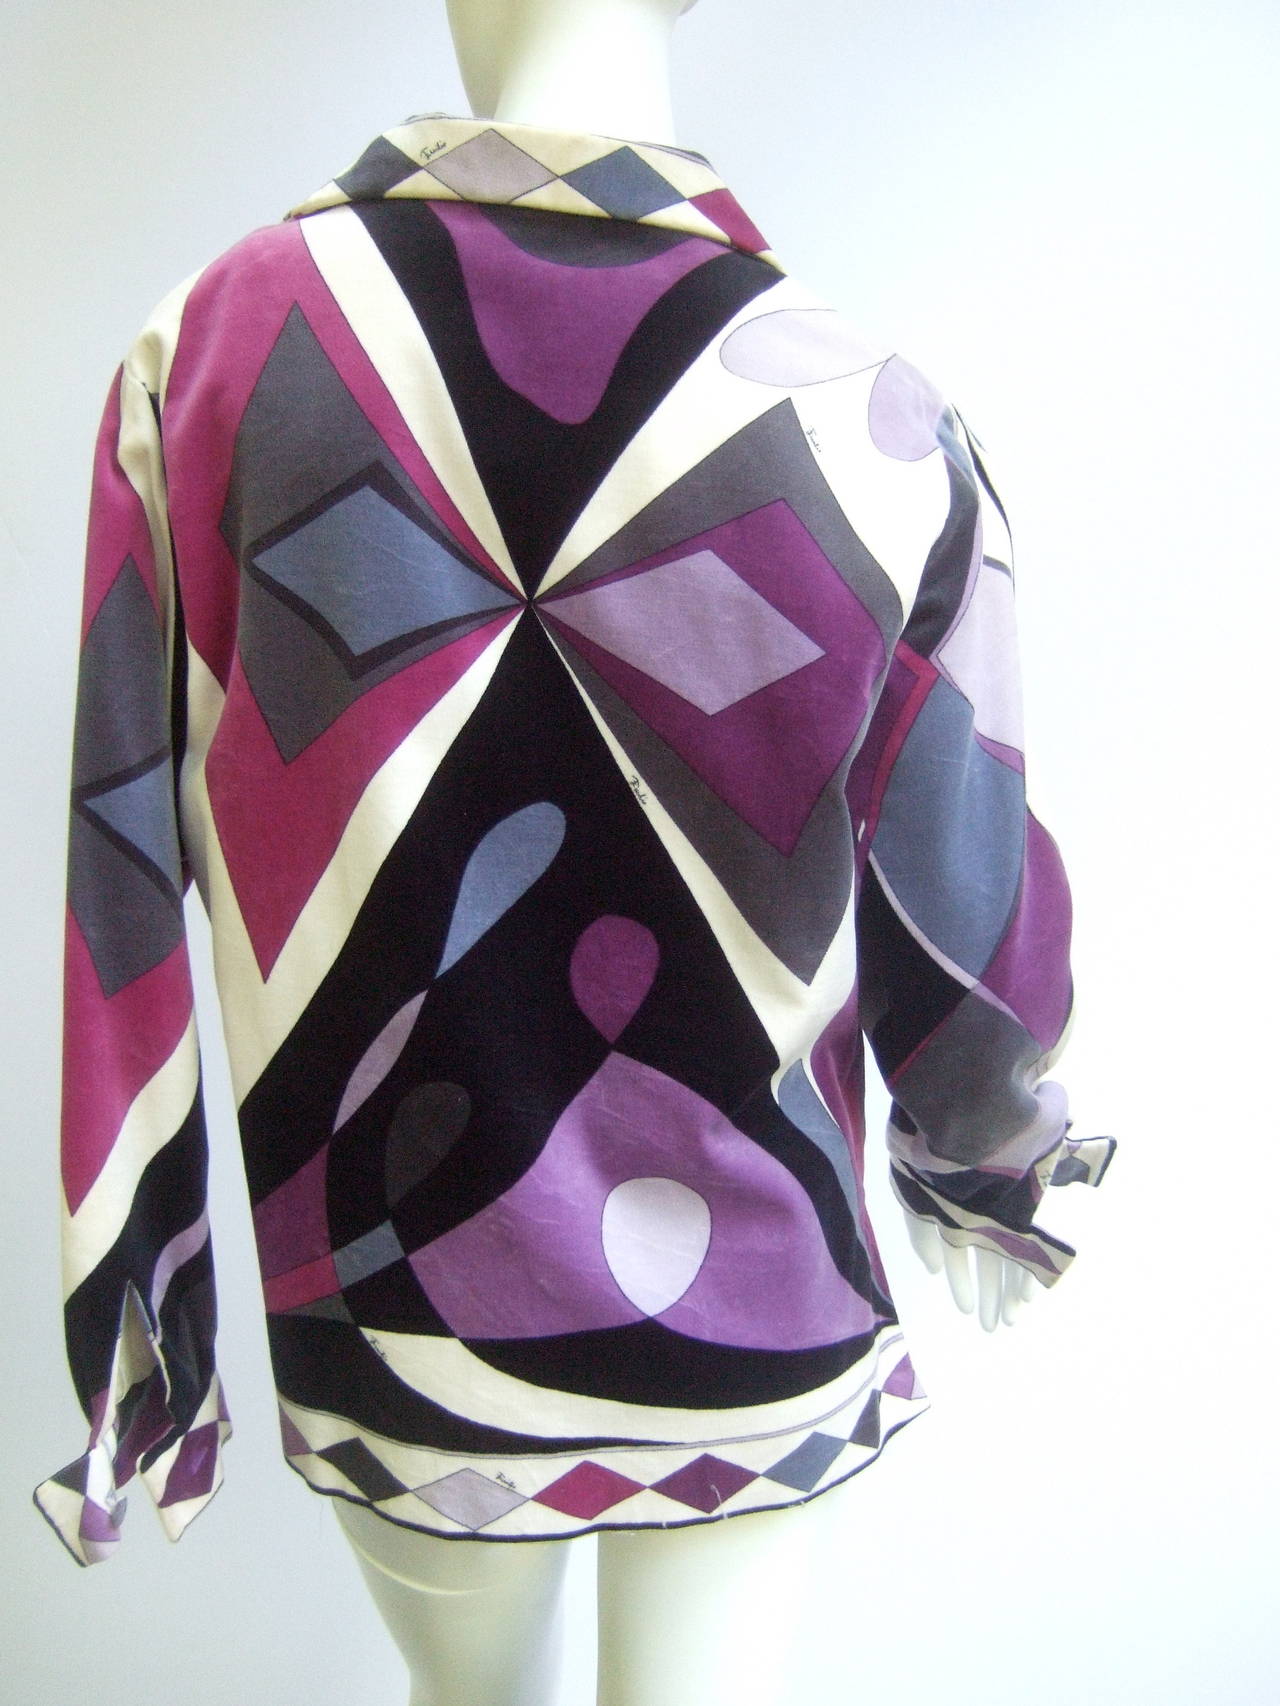 Emilio Pucci Pastel cotton velvet op art print jacket c 1970
The mod Italian jacket is designed with a mosaic of vibrant pastel hues & shapes

The pastel lavender, violet & deep fuchsia pink colors are juxtaposed with slate blue, gray & black